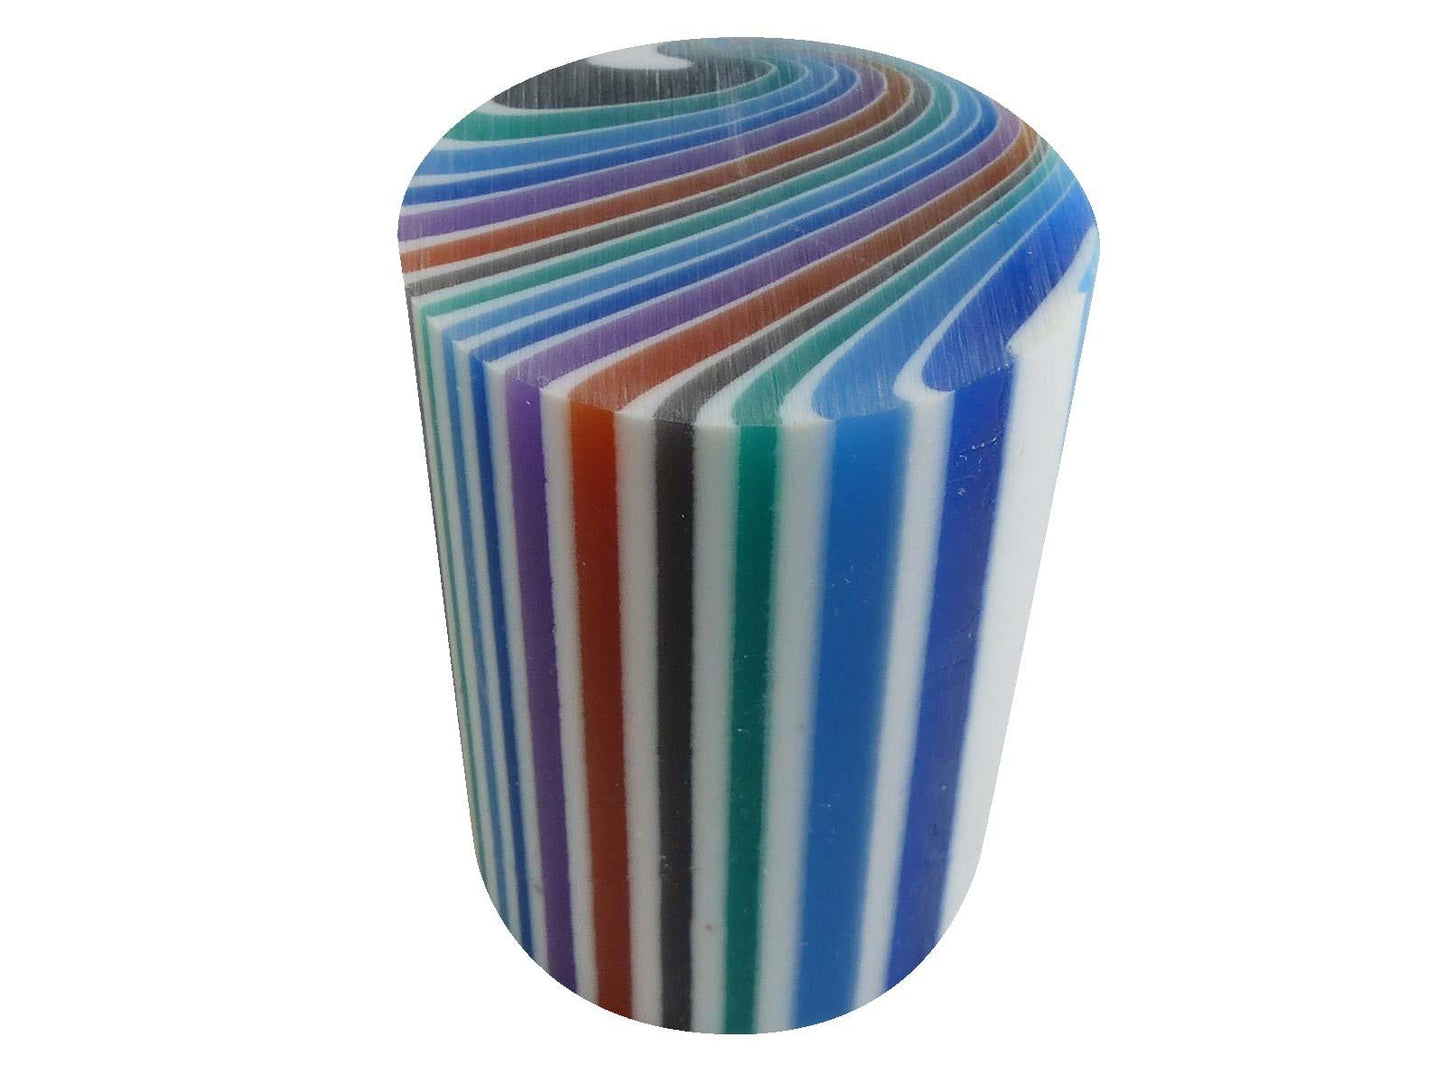 Turners' Mill Blue/Green Stripe Millerighe Polyester Turning Blank - 63.5x45x45mm (2.5x1.77x1.77")